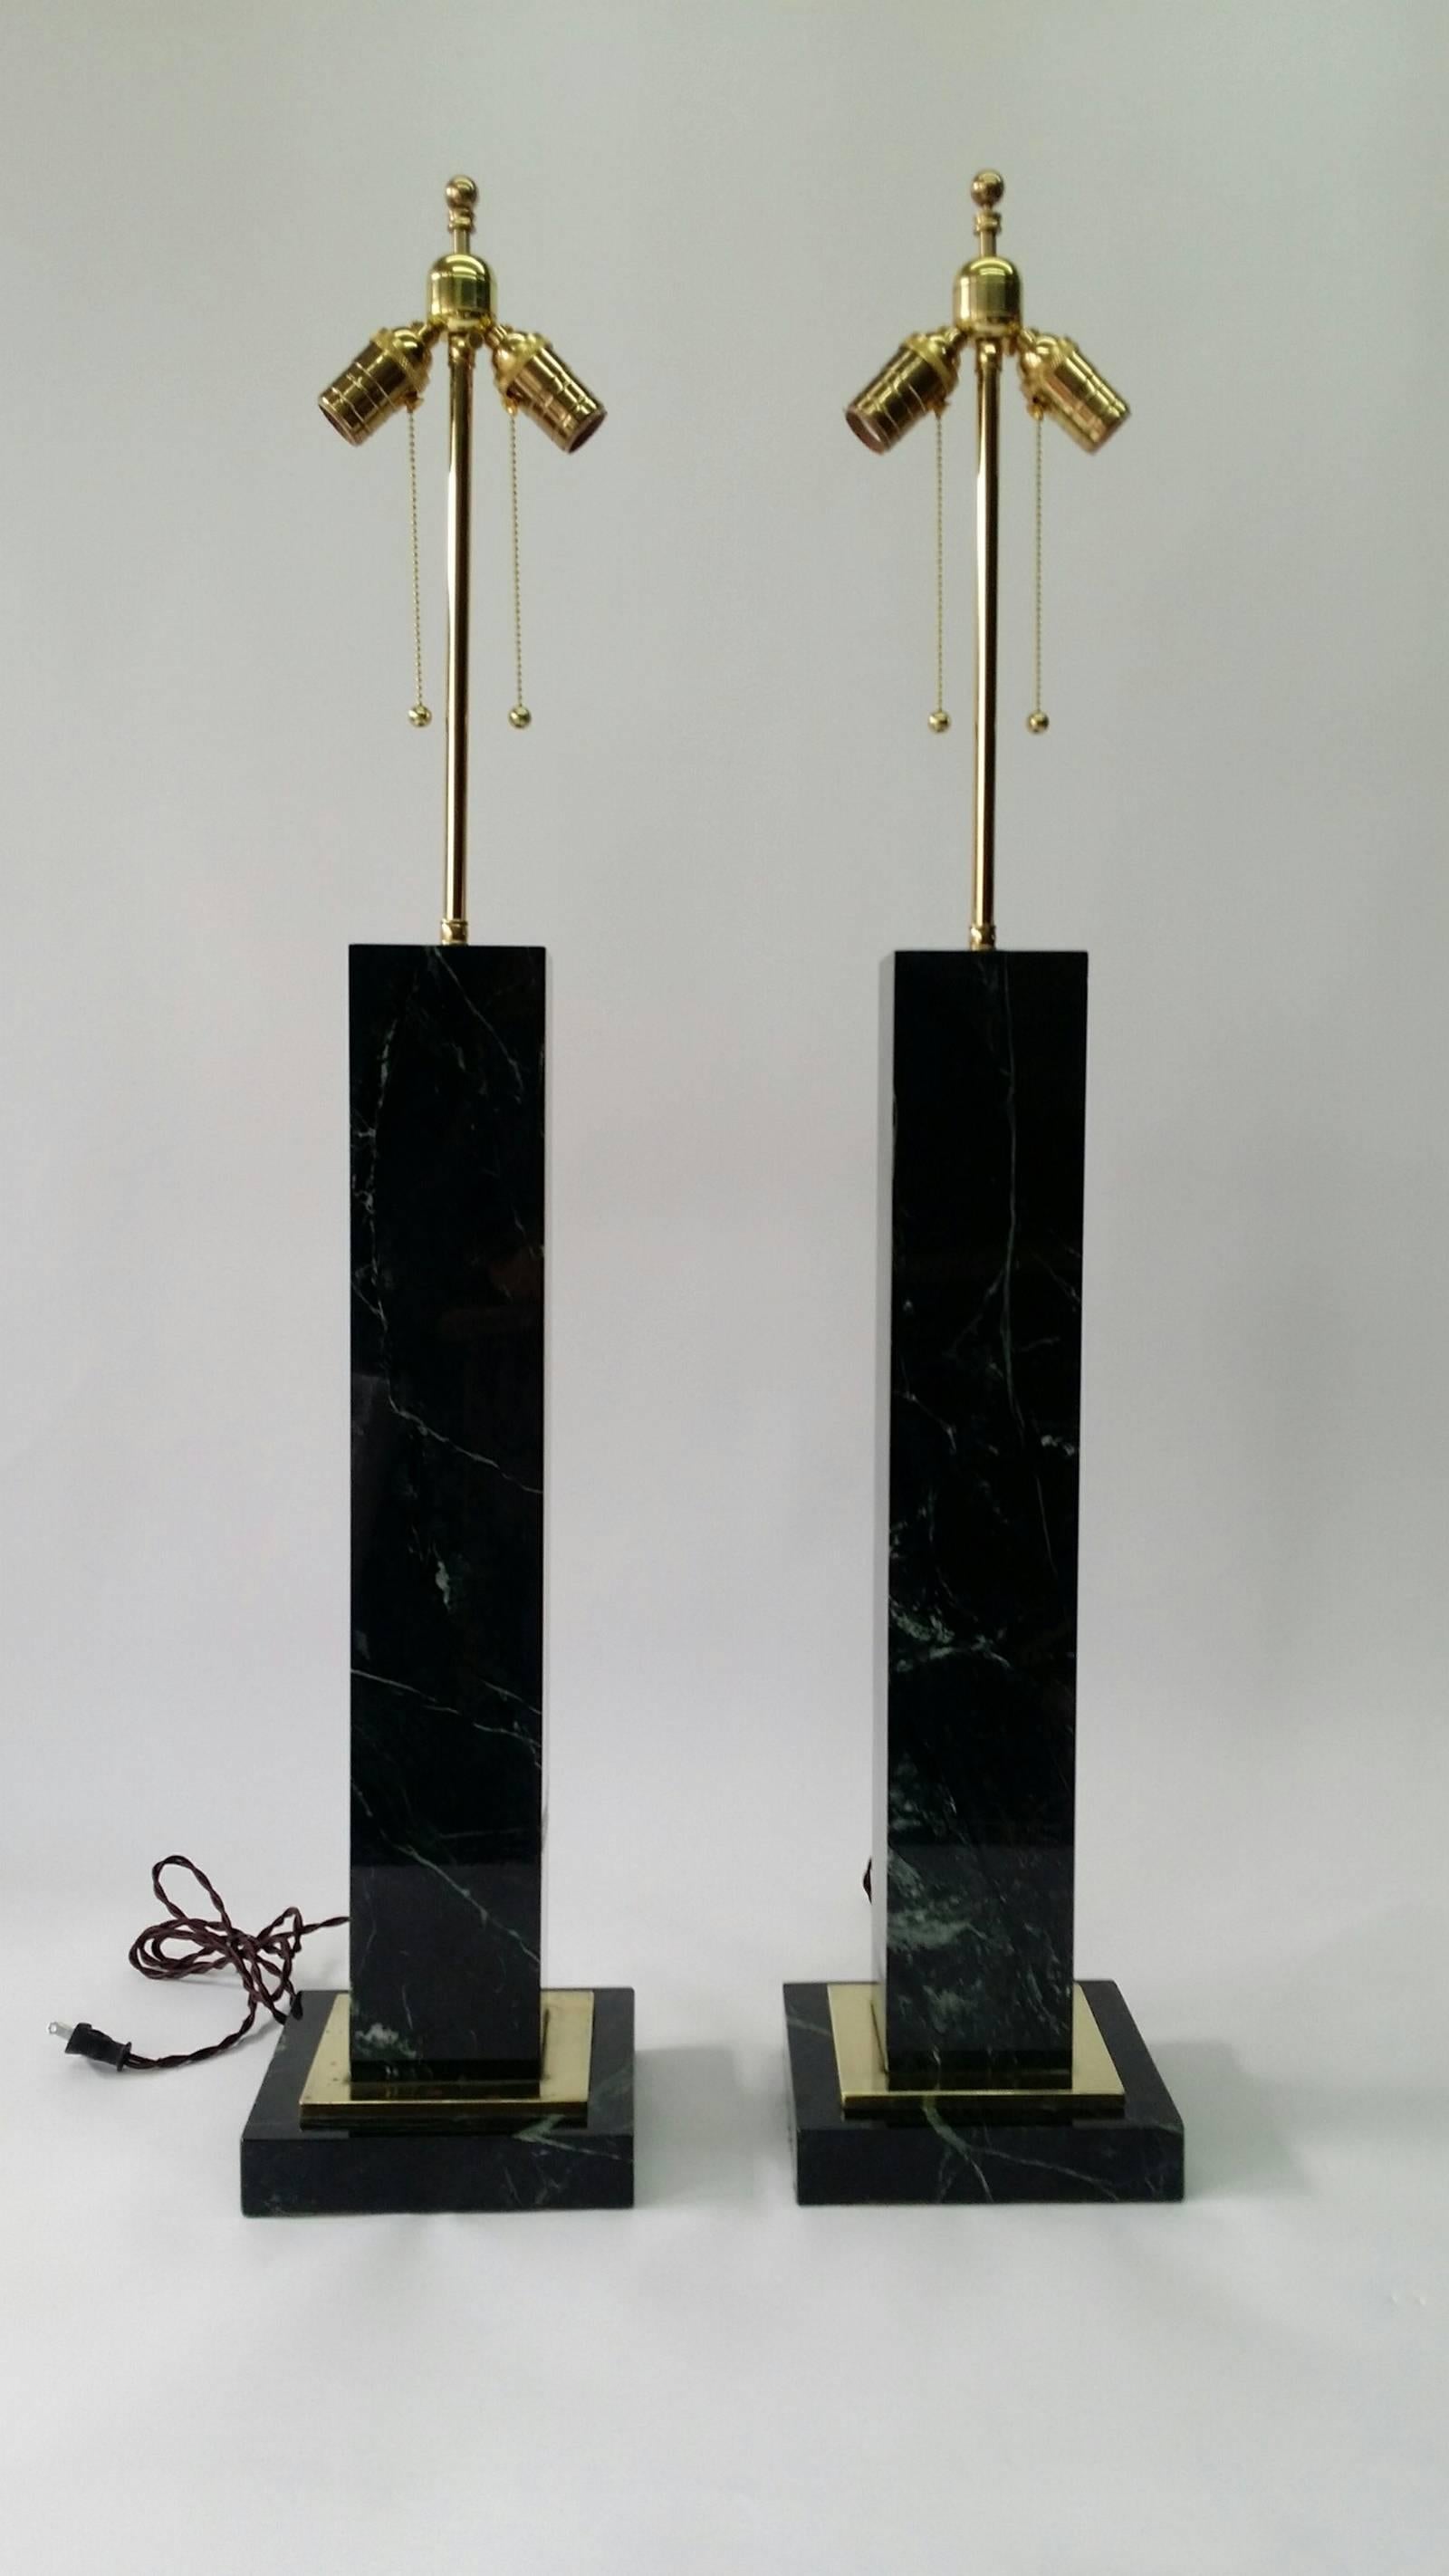 Monumental pair of table lamps made from solid Vermont Verde green marble, circa 1940s. The lamps have solid brass accents on the bases and stand 42 inches tall. They are 8 inches wide at the bases. Fully rewired, including cloth wrapped cords, and